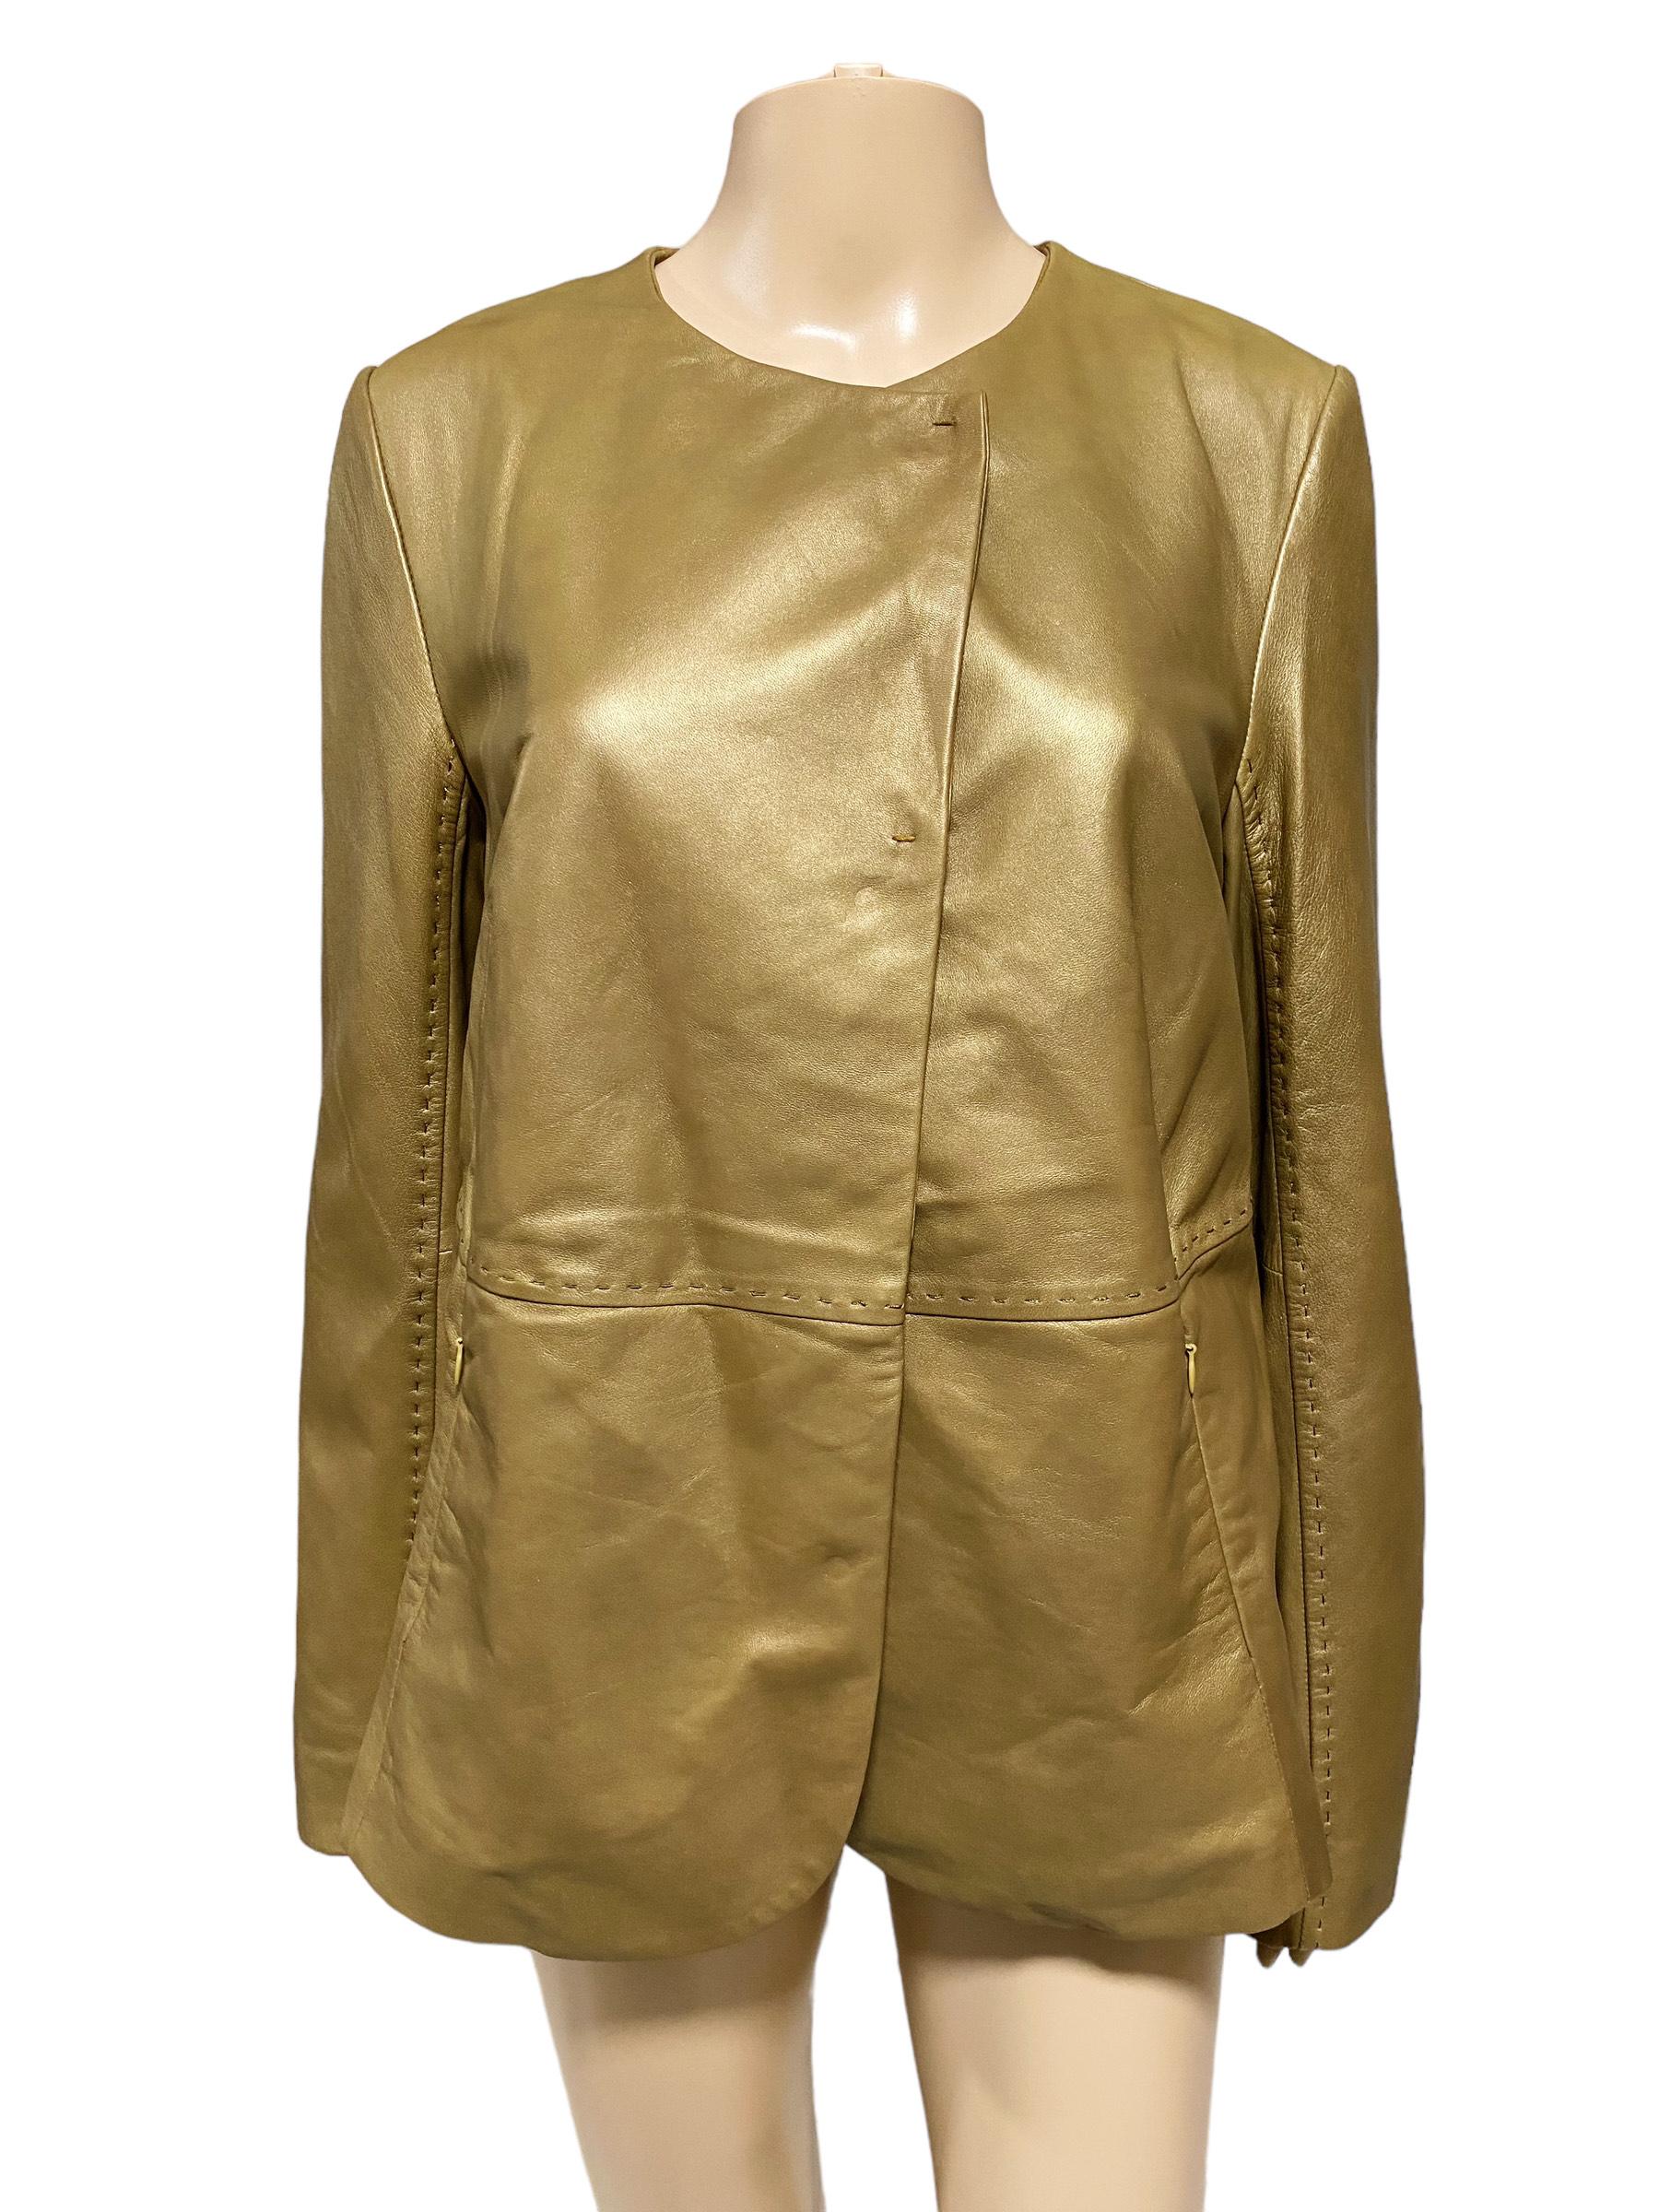 Beautiful elegant jacket designed by Marina Rinaldi, fine Italian manufacture. Marina Rinaldi x Max Mara - Rare & limited edition soft leather gold jacket.  The jacket is suitable for elegant morning & evening and also for business